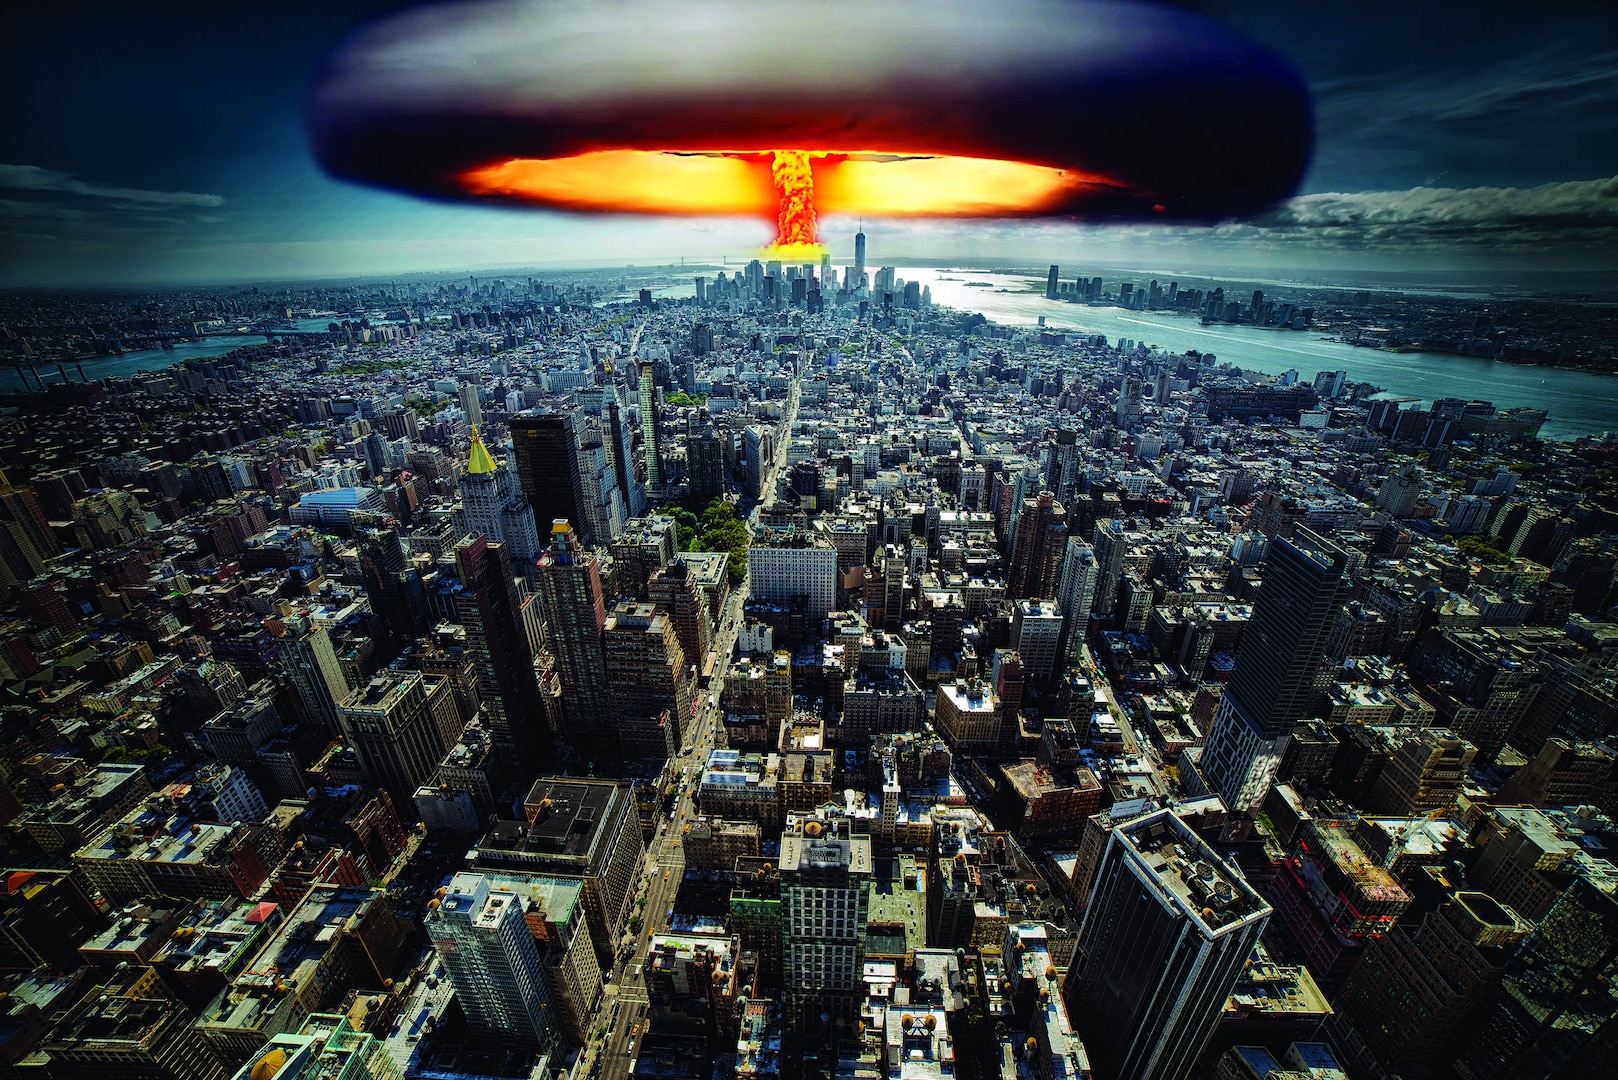 Dream About Dying in a Nuclear Explosion: Unveiling the Harsh Realities